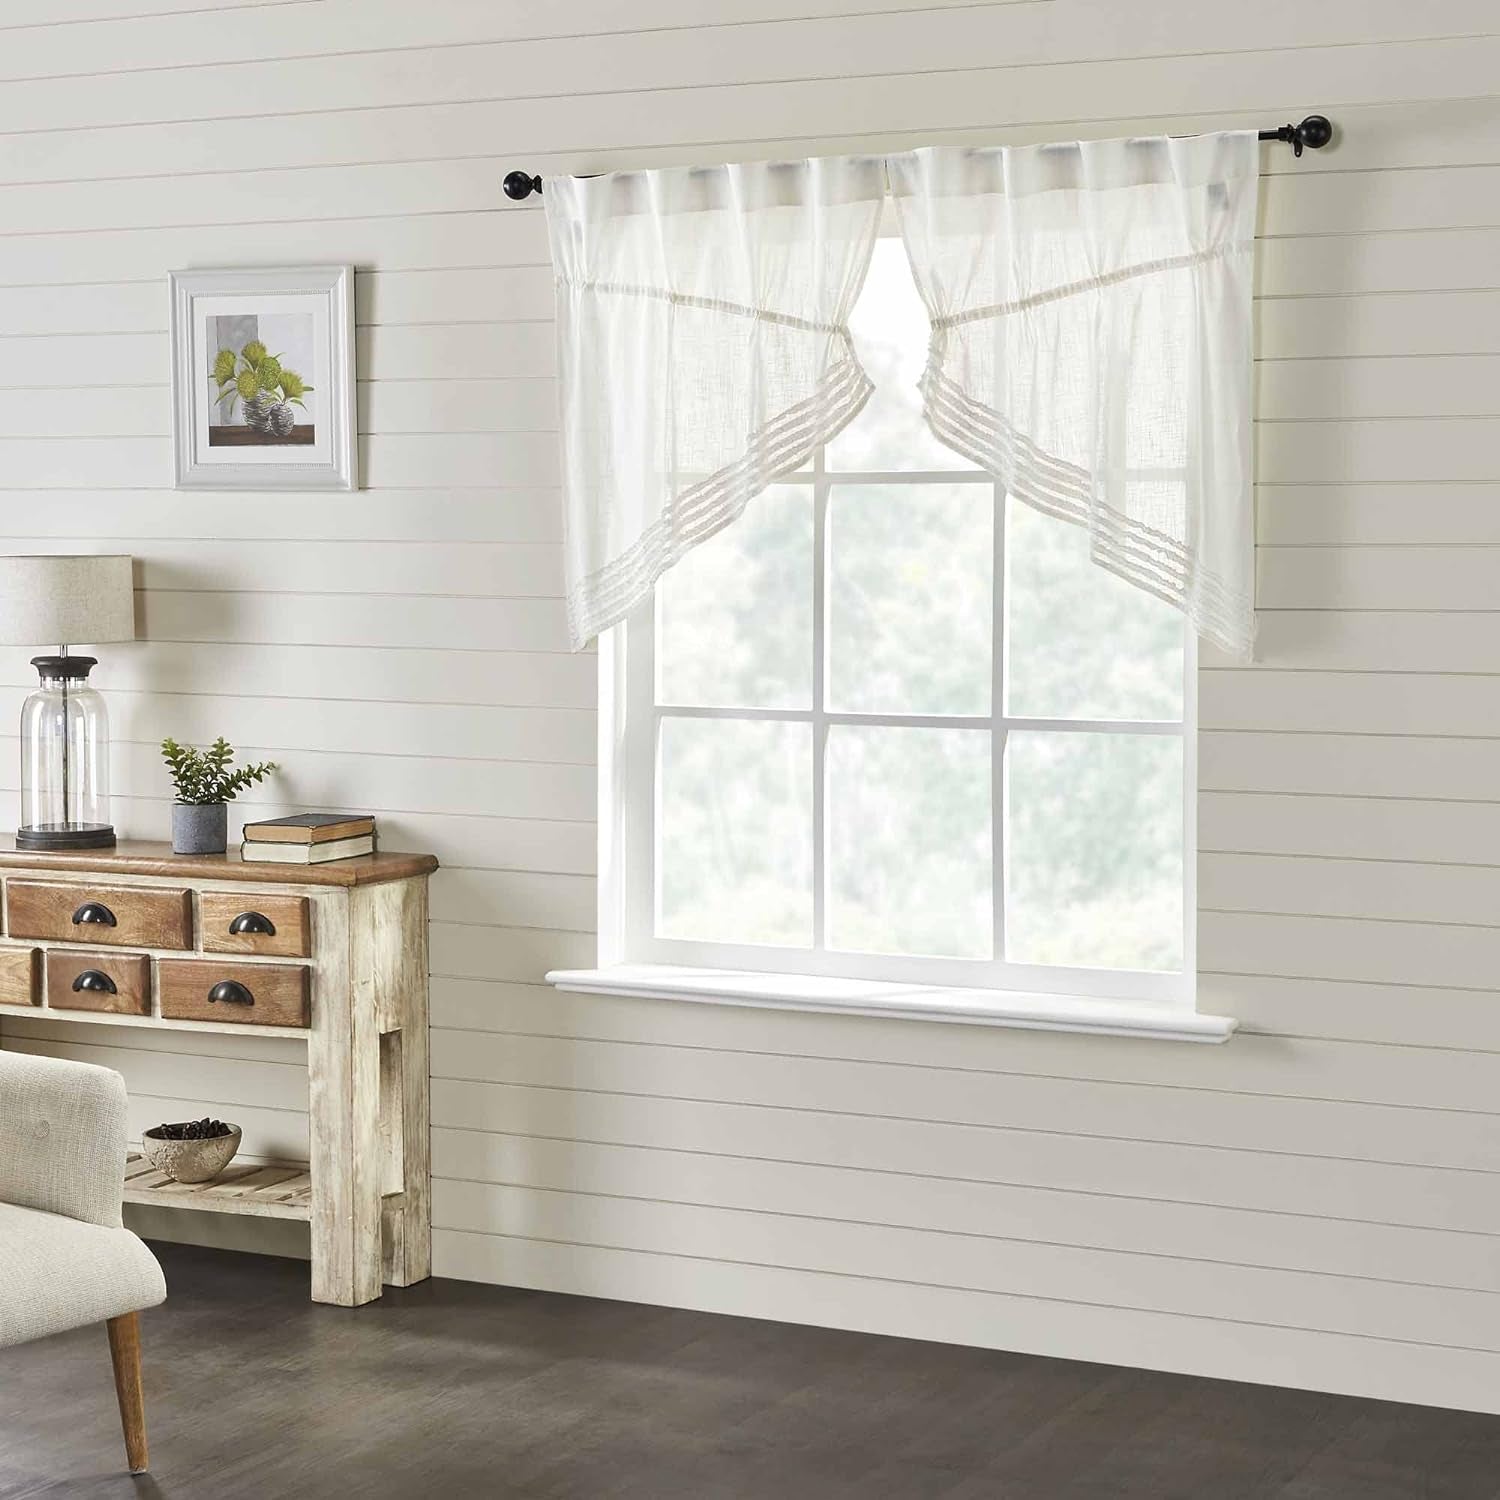 Piper Classics Kathryn Prairie Swags, Set of 2, 36" Long, Gathered Curtains with Drawstring in a Linen-Look Soft White Cotton Semi-Sheer Fabric, Farmhouse, Cottage, Country Style  Piper Classics   